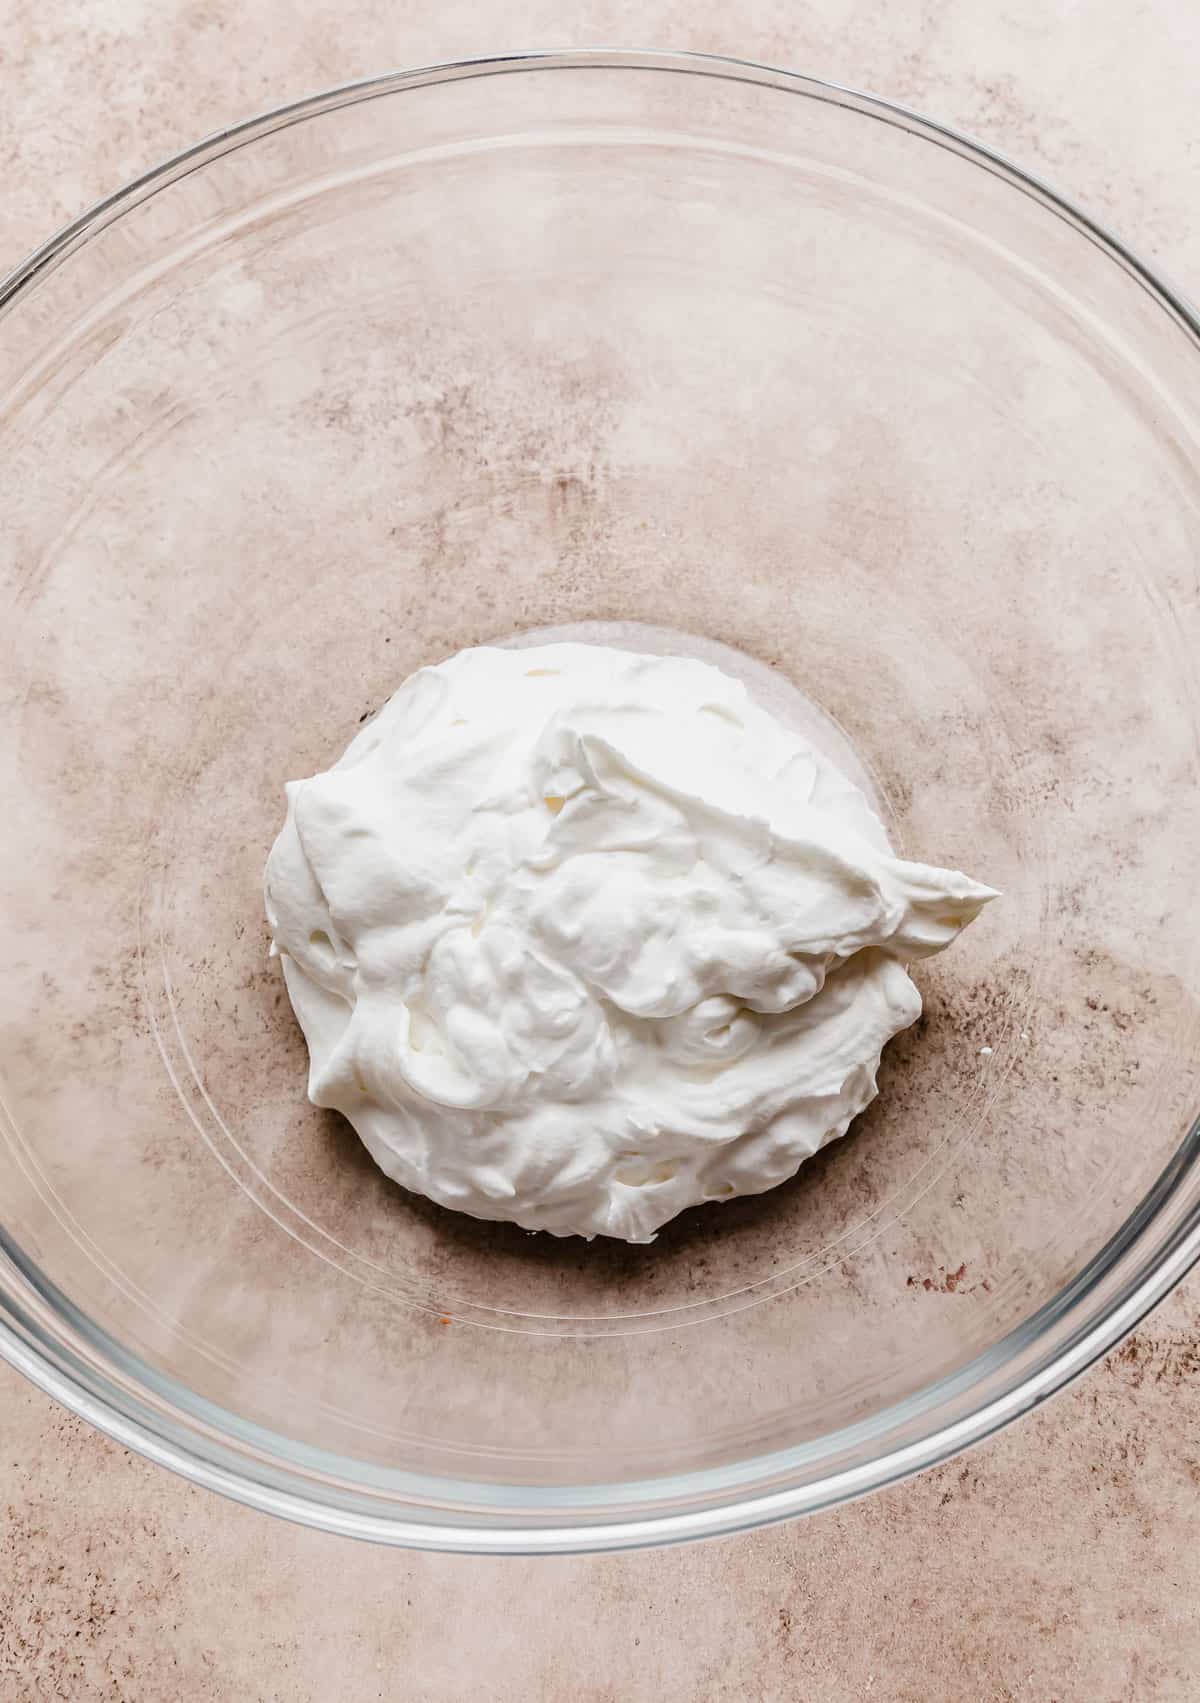 A small amount of whipped cream in a glass bowl on a light beige background.